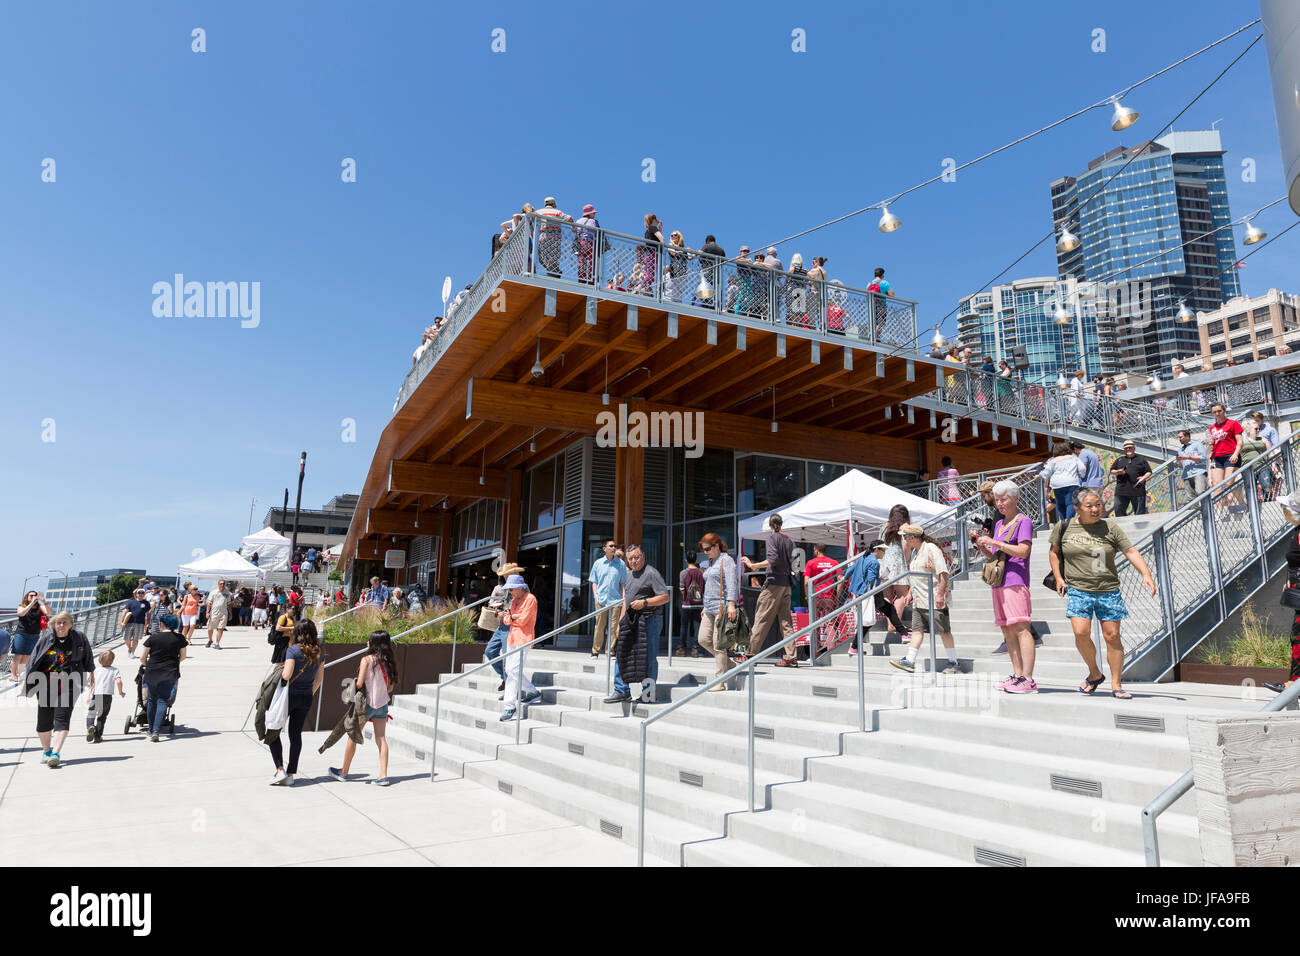 Seattle, United States. 29th June, 2017. Seattle, Washington: Historic Pike Place MarketFront had its grand opening under a warm summer sun. The $74 million MarketFront expansion provides a dynamic public plaza with views of Puget Sound and Olympic Mountains as well as table space for farmers, craftspeople and artisan purveyors, retail space, low-income housing, a neighborhood center and parking. The project was created in accordance of Market historic district guidelines and the Pike Place Market charter. Credit: Paul Christian Gordon/Alamy Live News Stock Photo